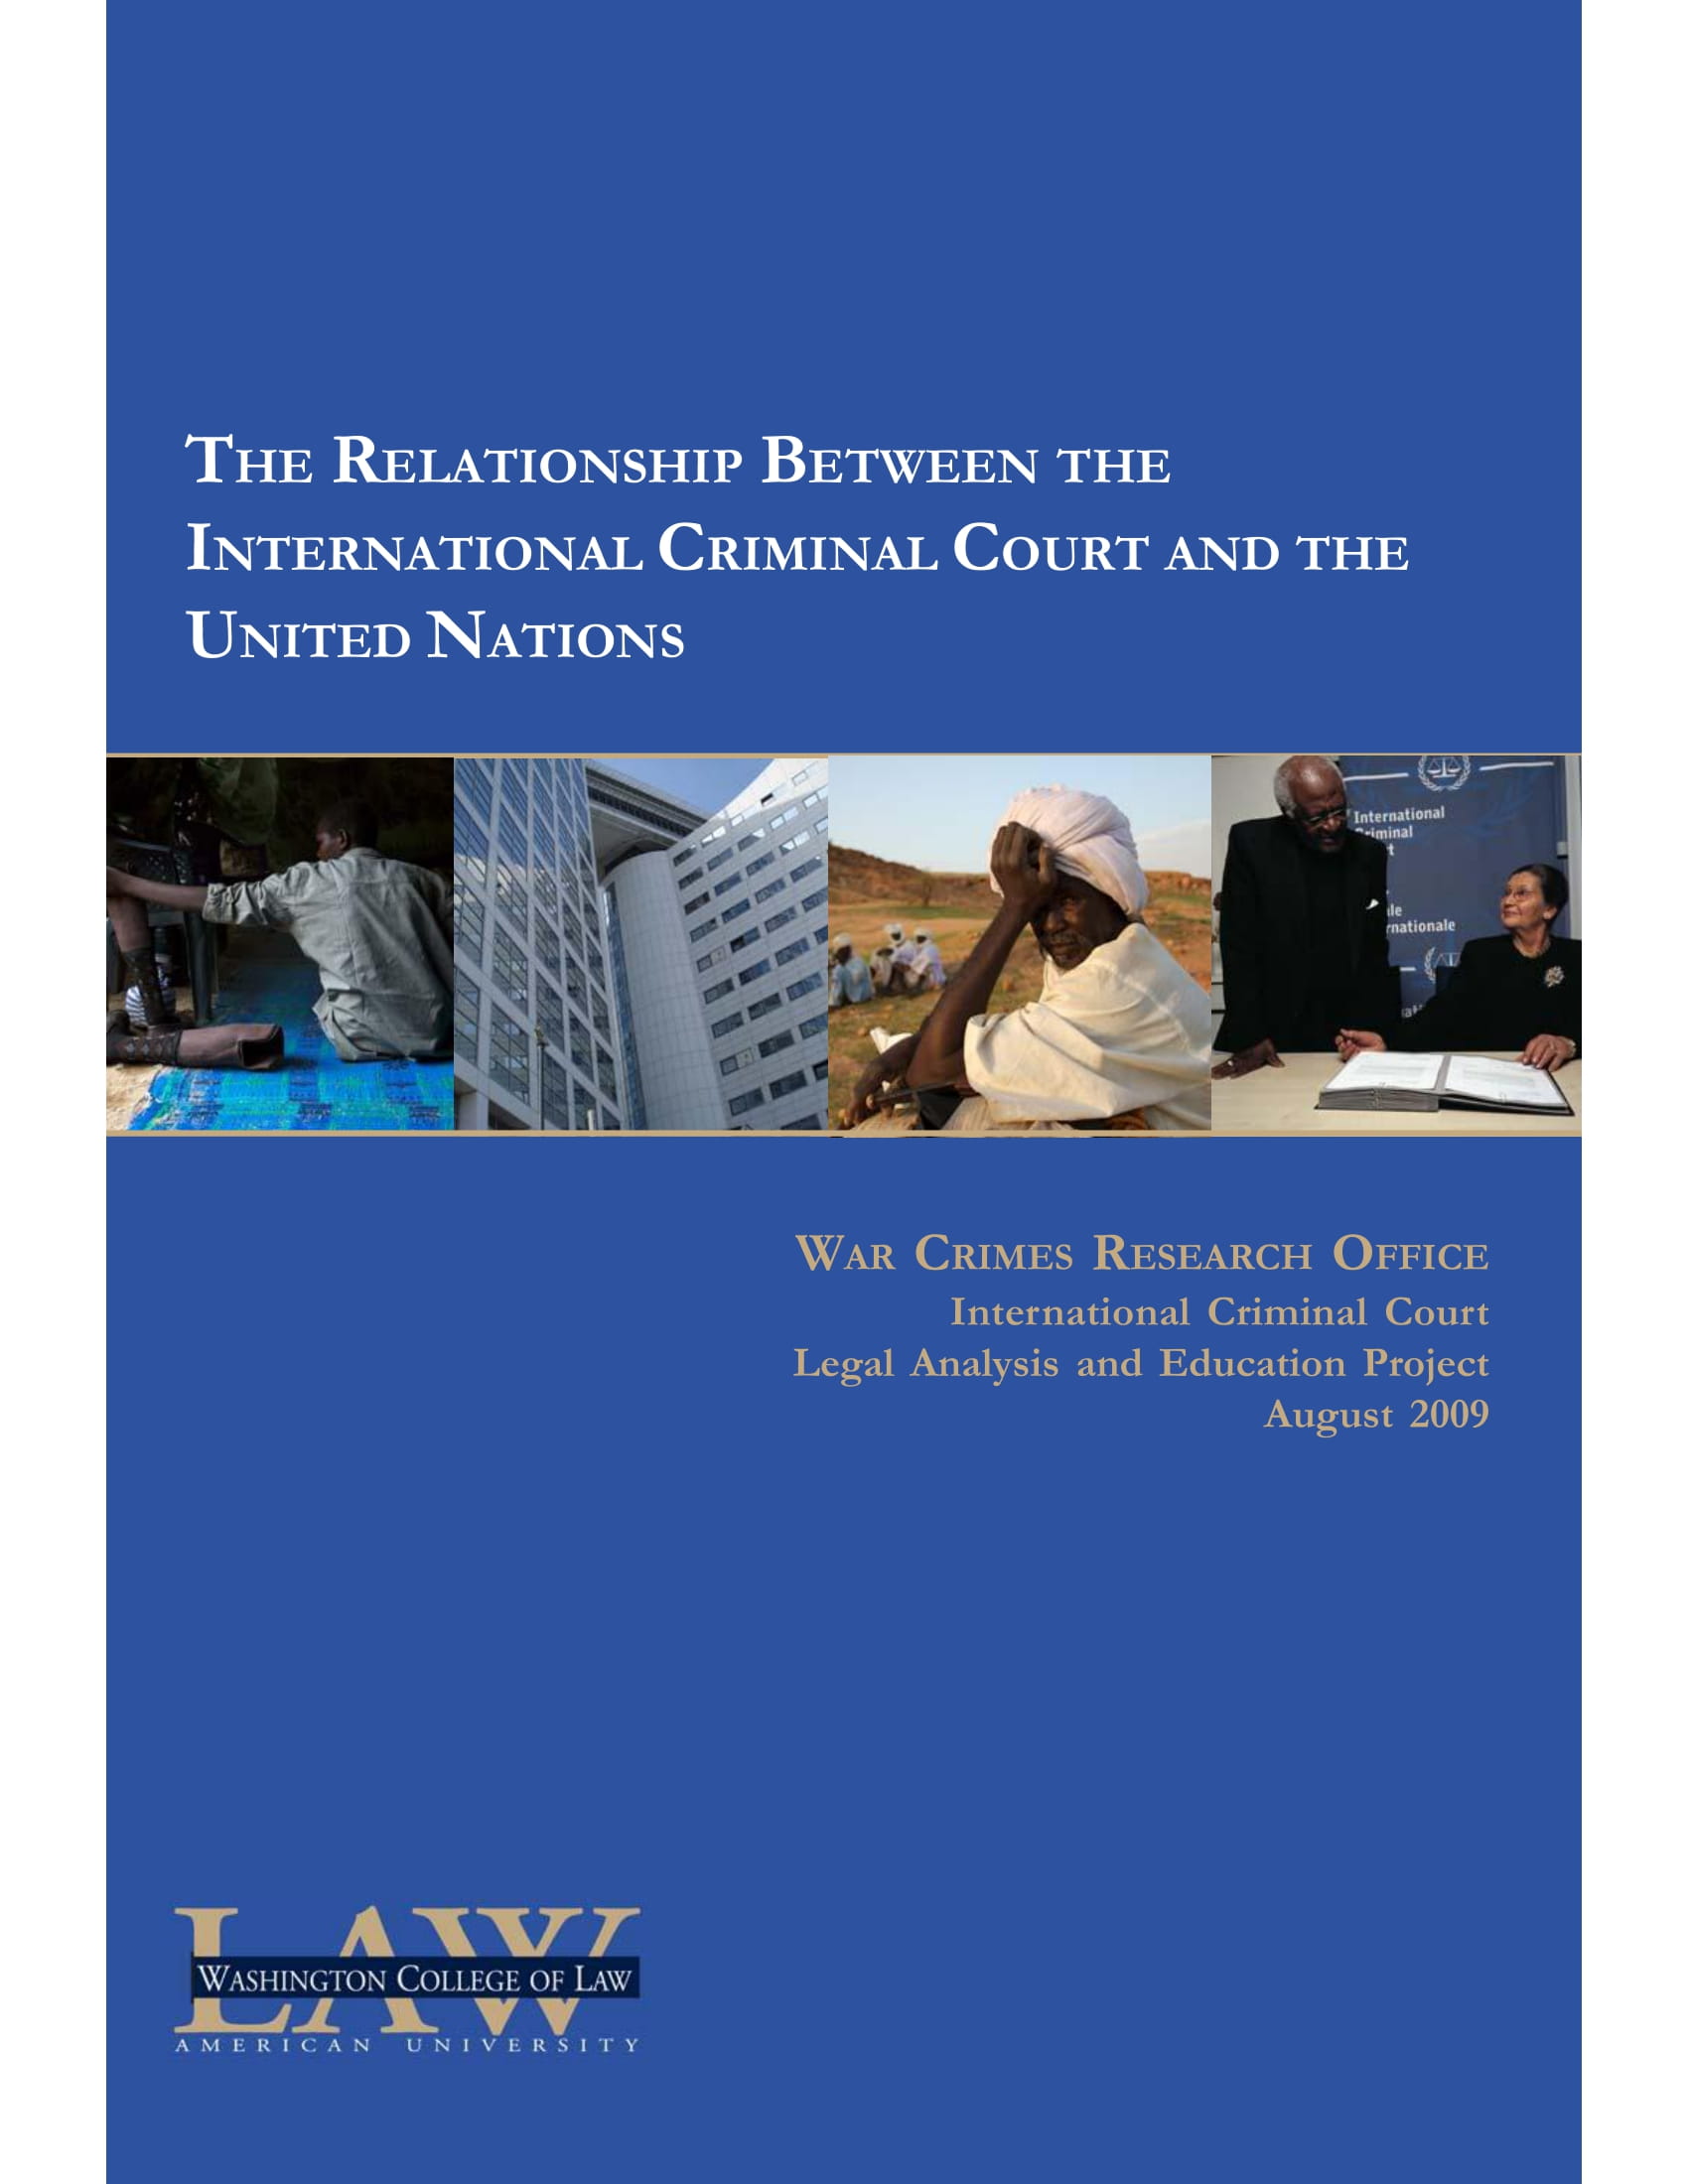 Report 8: The Relationship Between the International Criminal Court and the United Nations